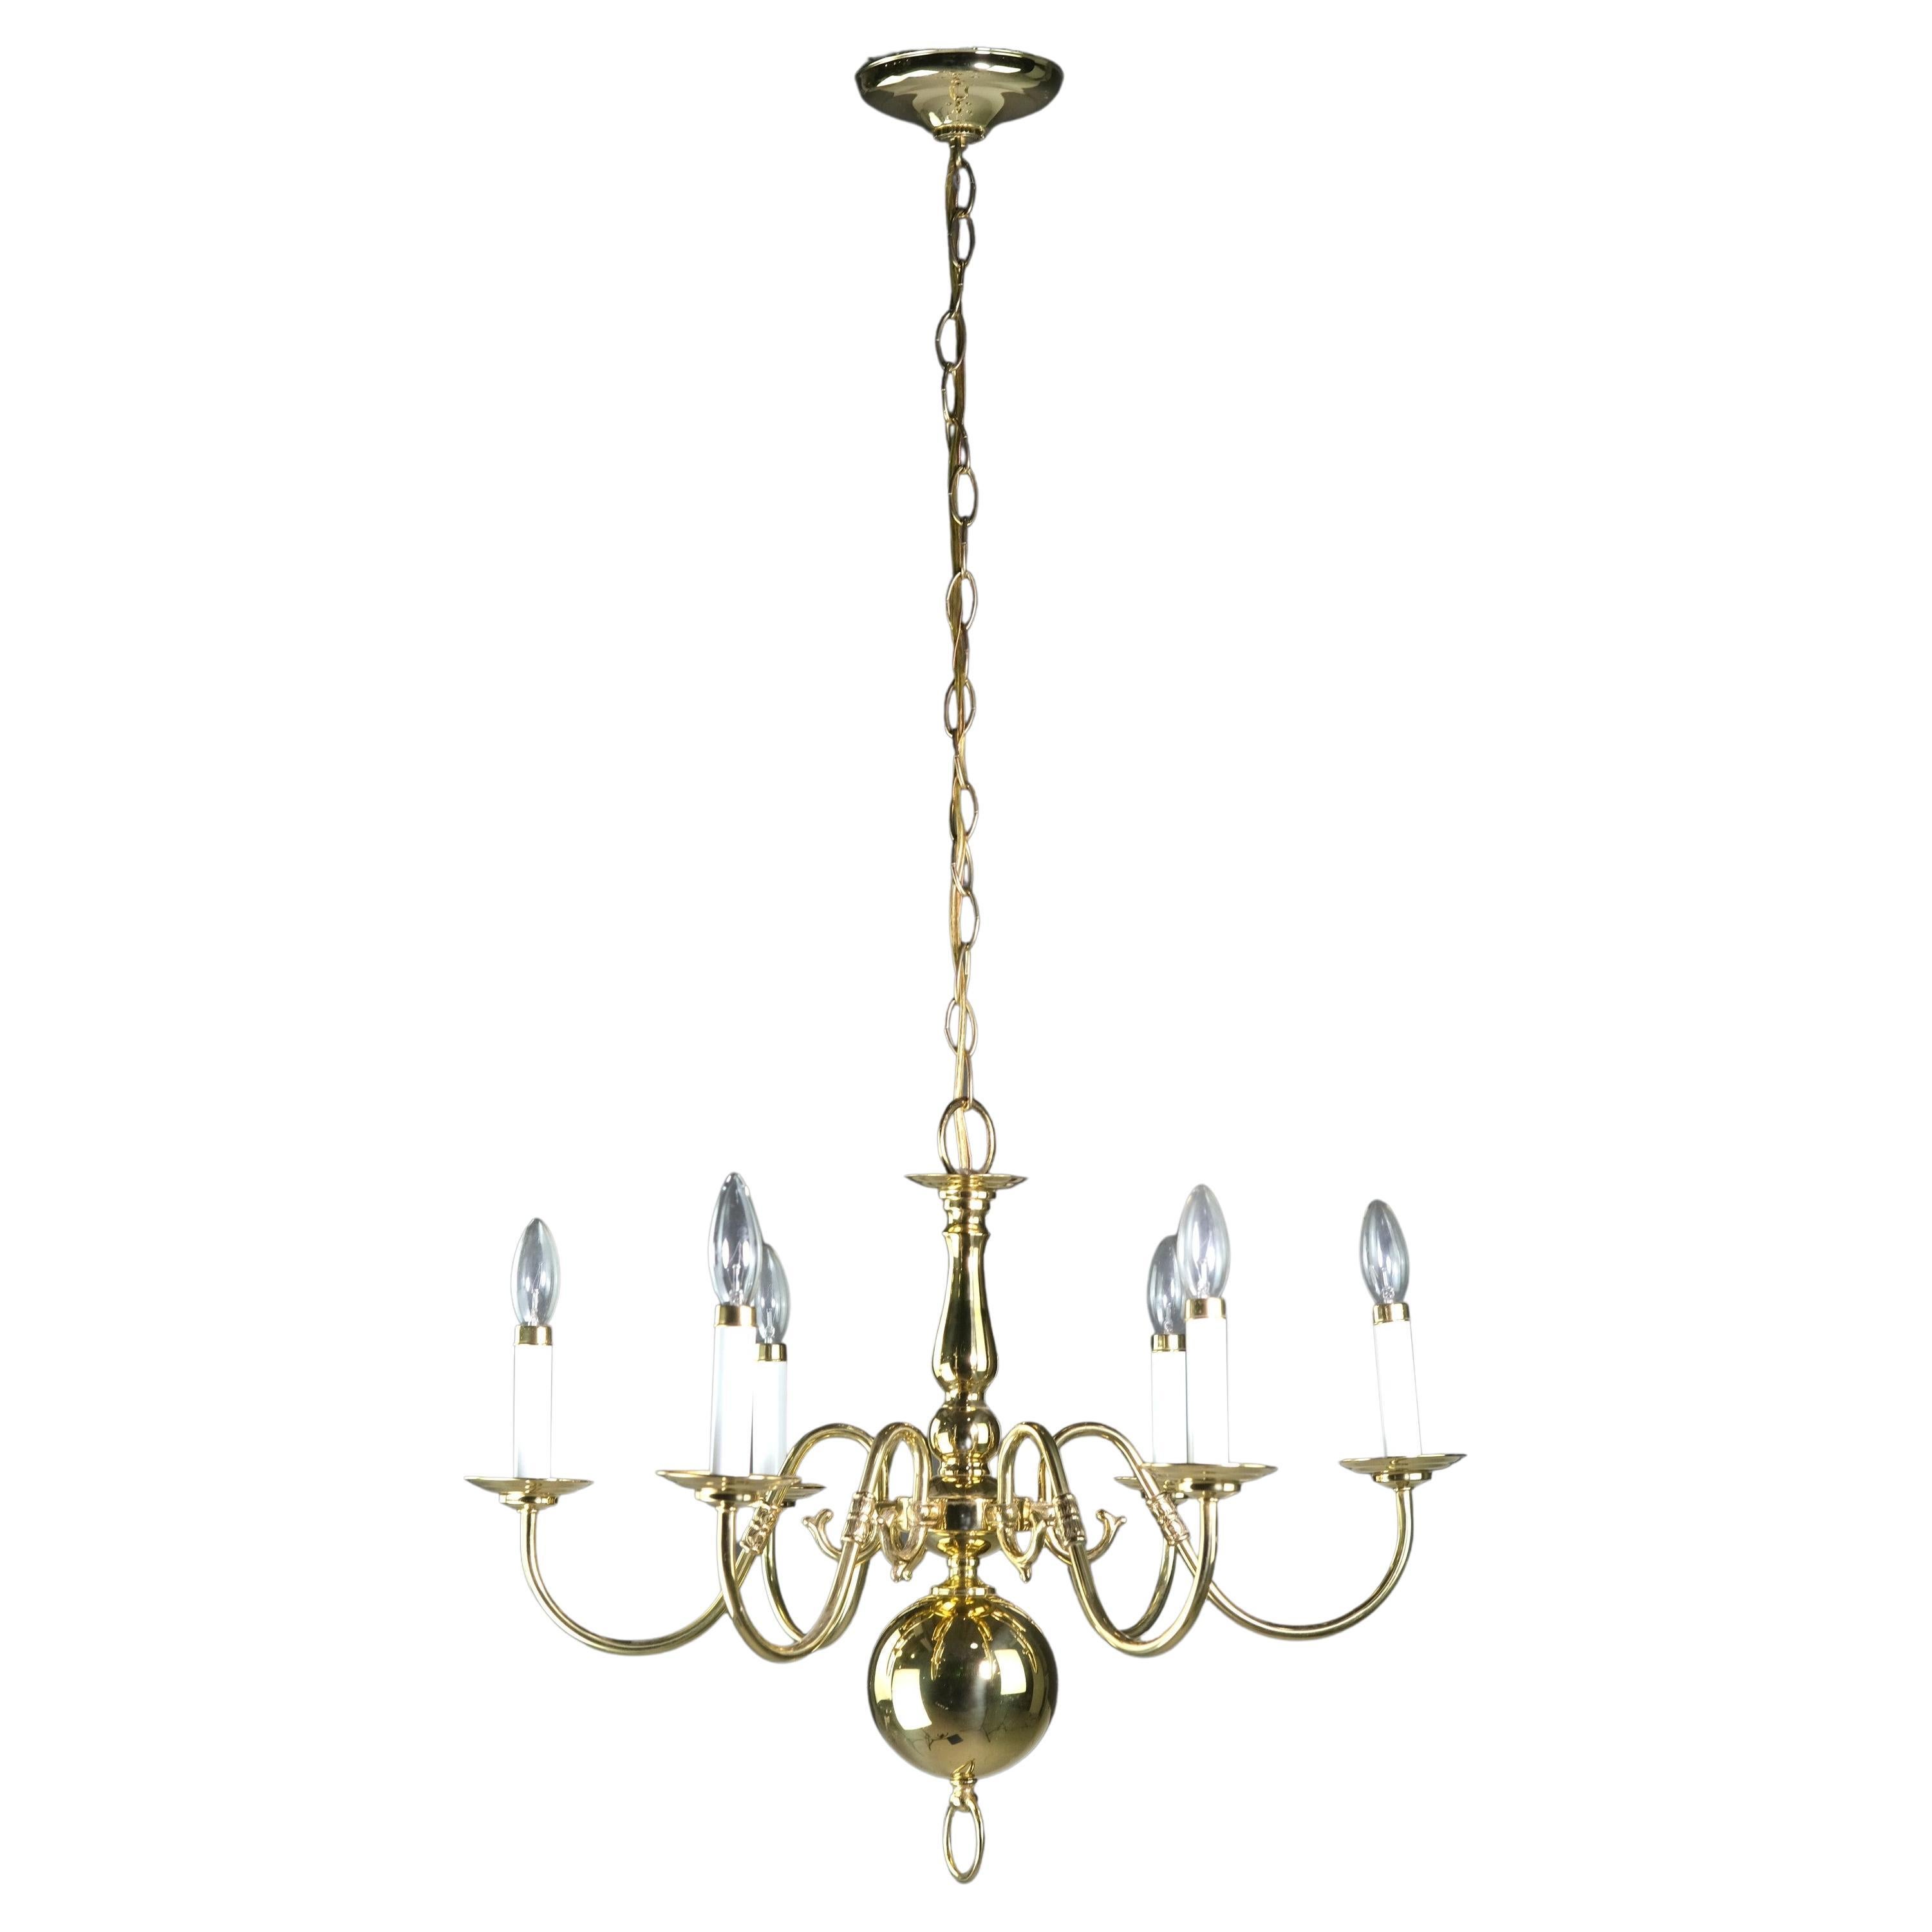 Restored Williamsburg Style Polished Brass Chandelier 6 Arms